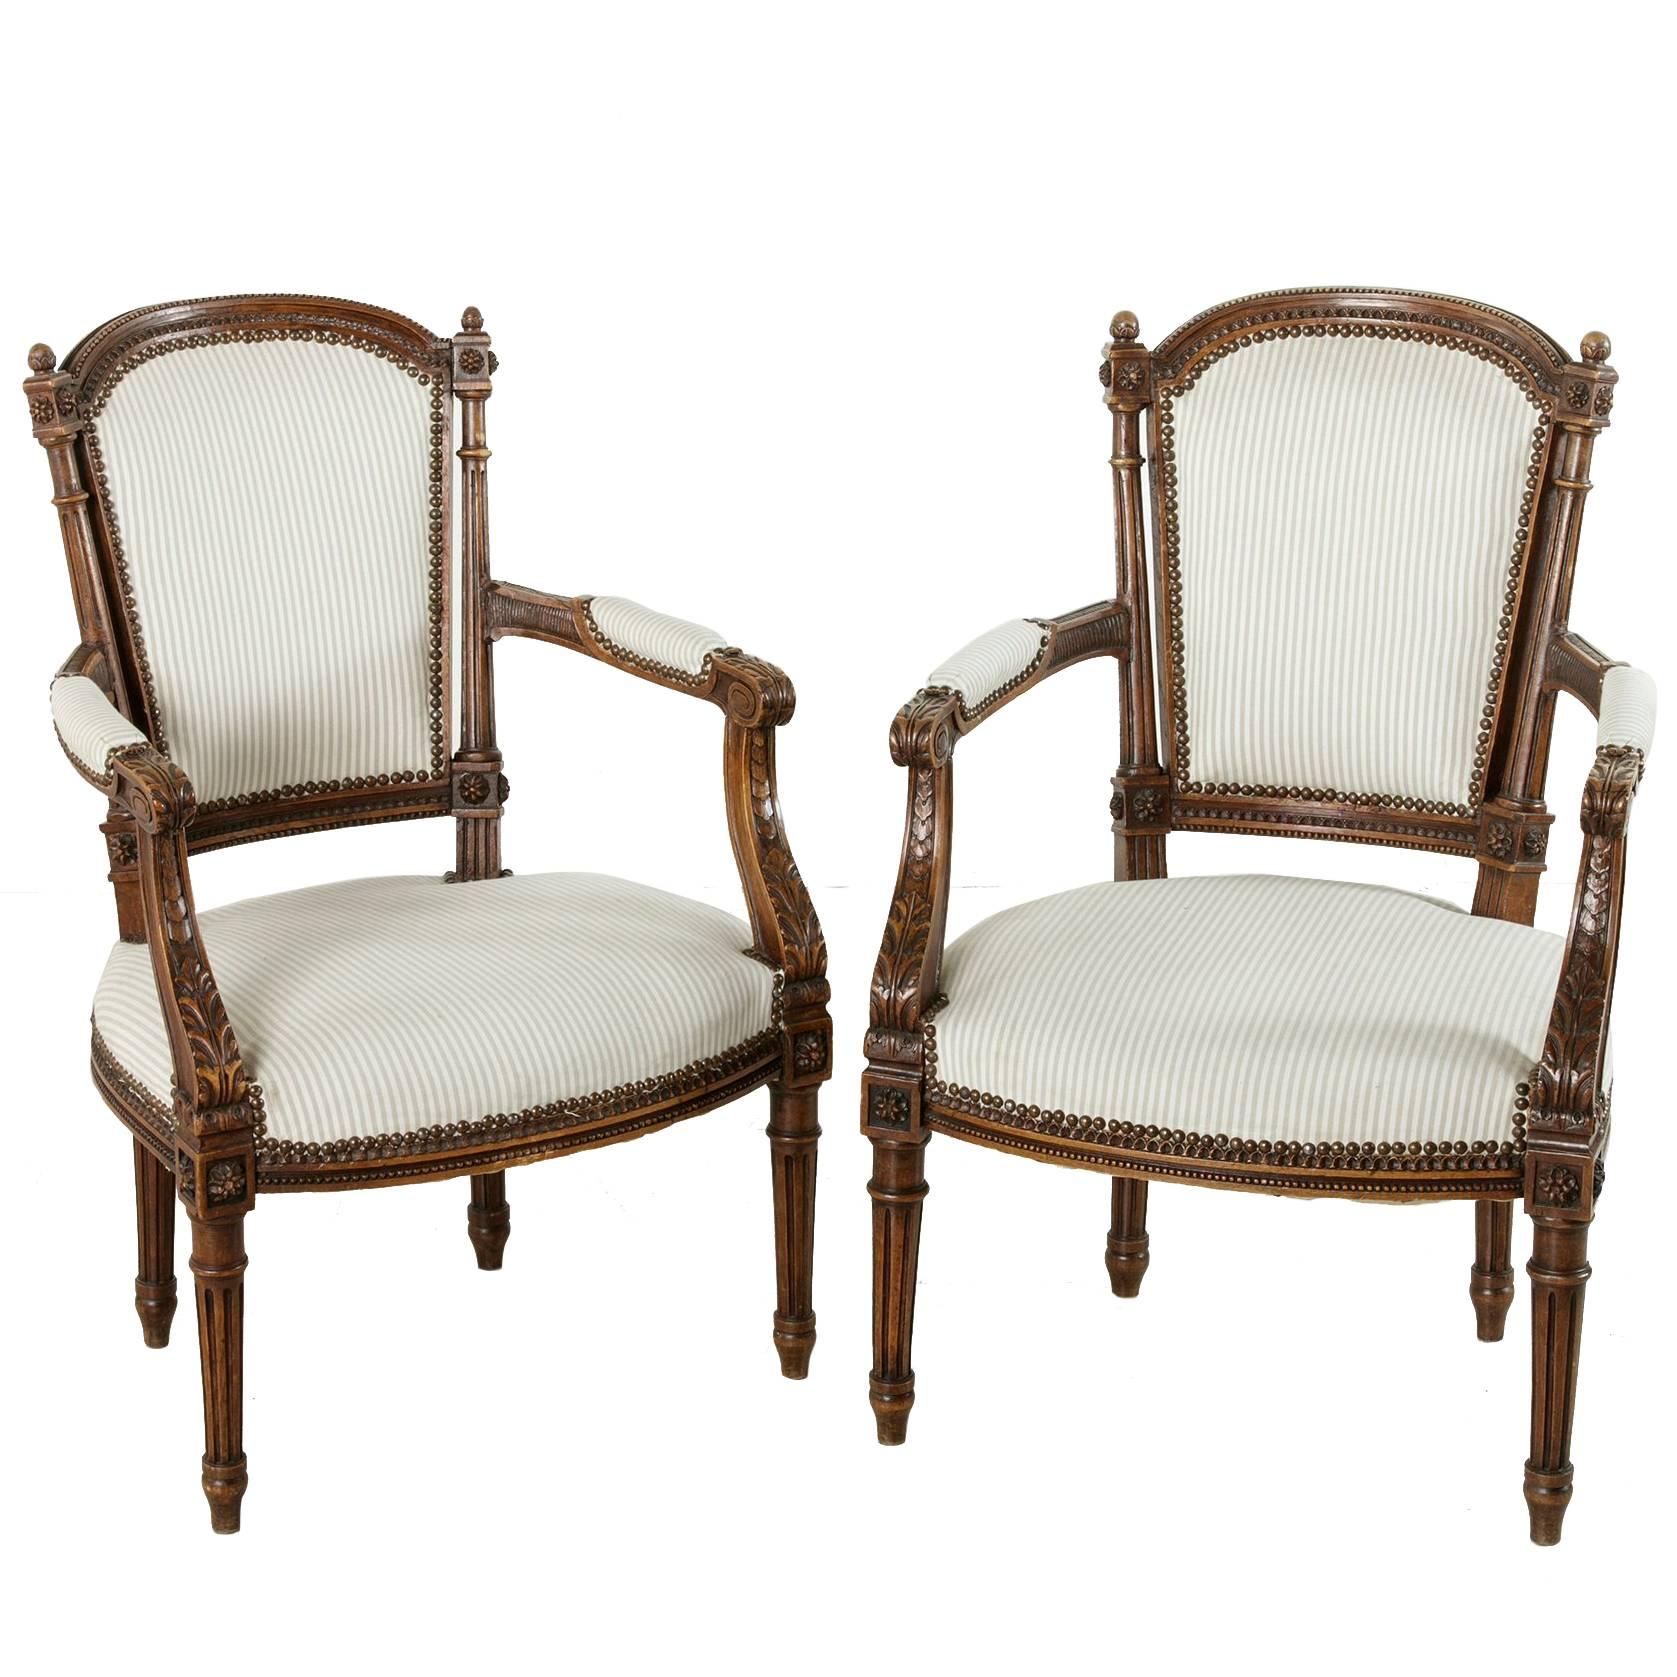 Pair of 19th Century Louis XVI Style Hand Carved Walnut Armchairs from Provence